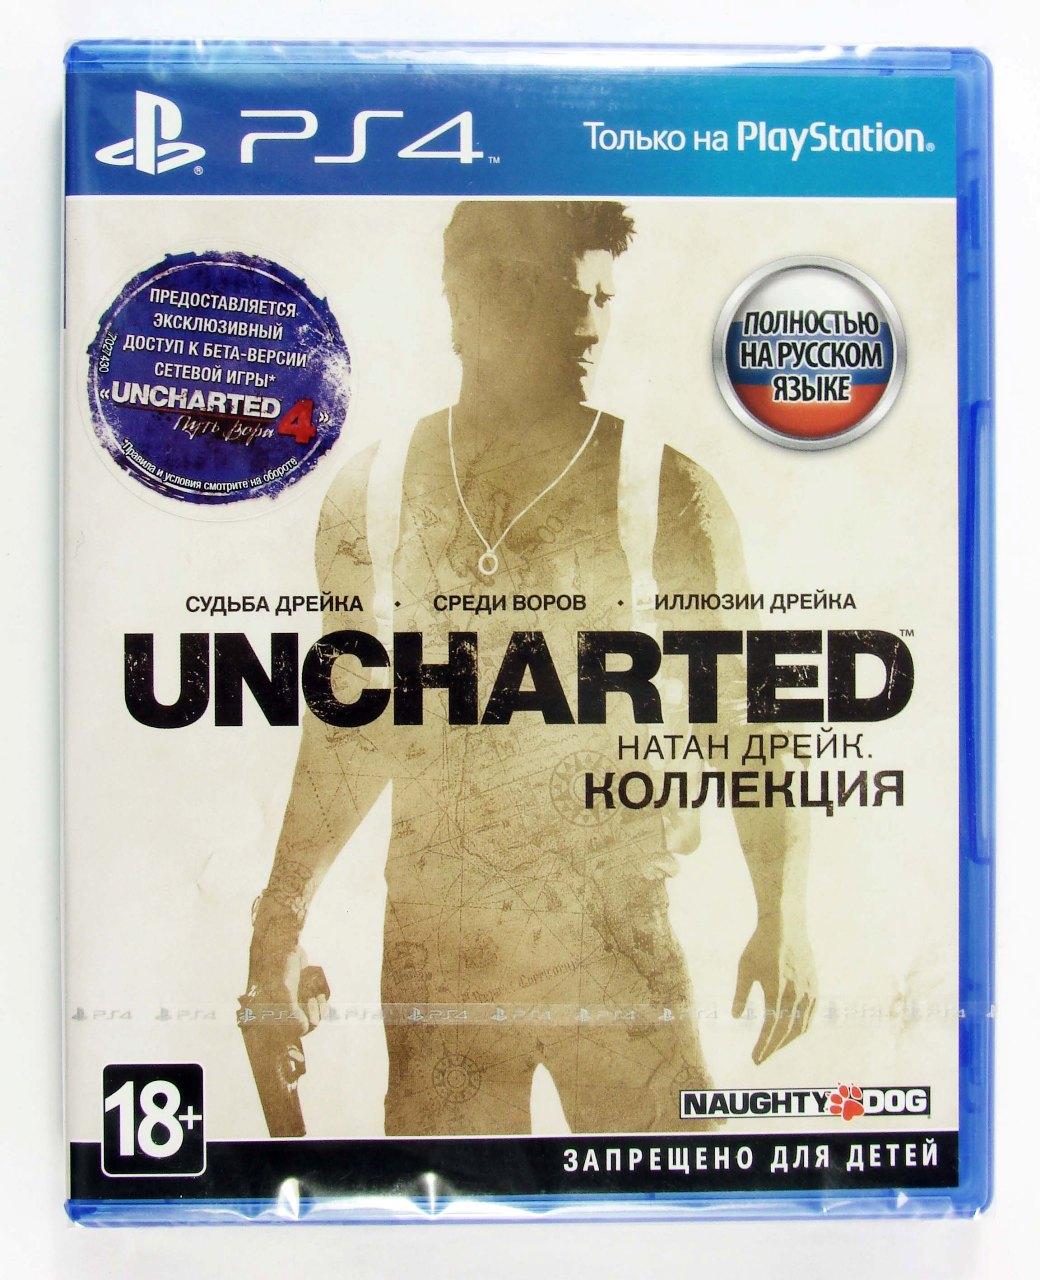   Uncharted:  .  (PS4,    ),  "SoftClub"